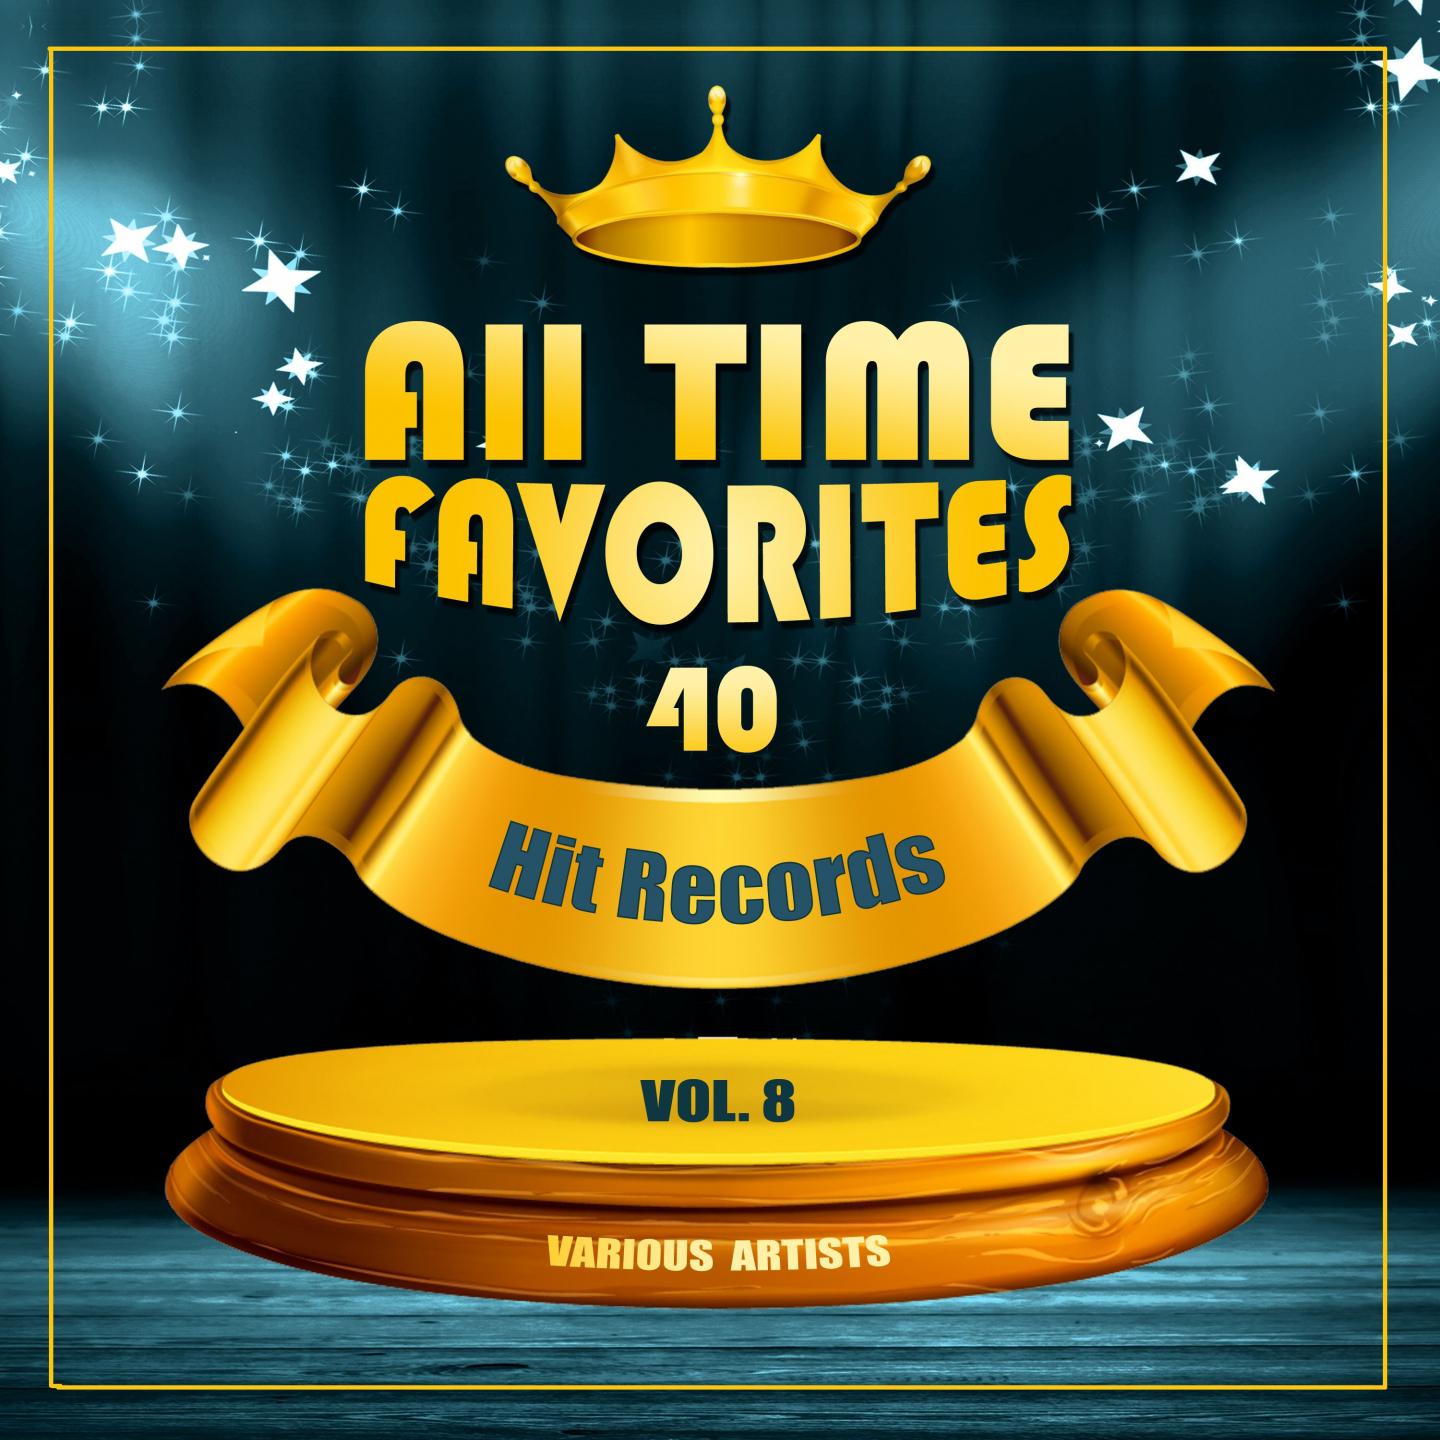 All Time Favorites (40 Hit Records), Vol. 8